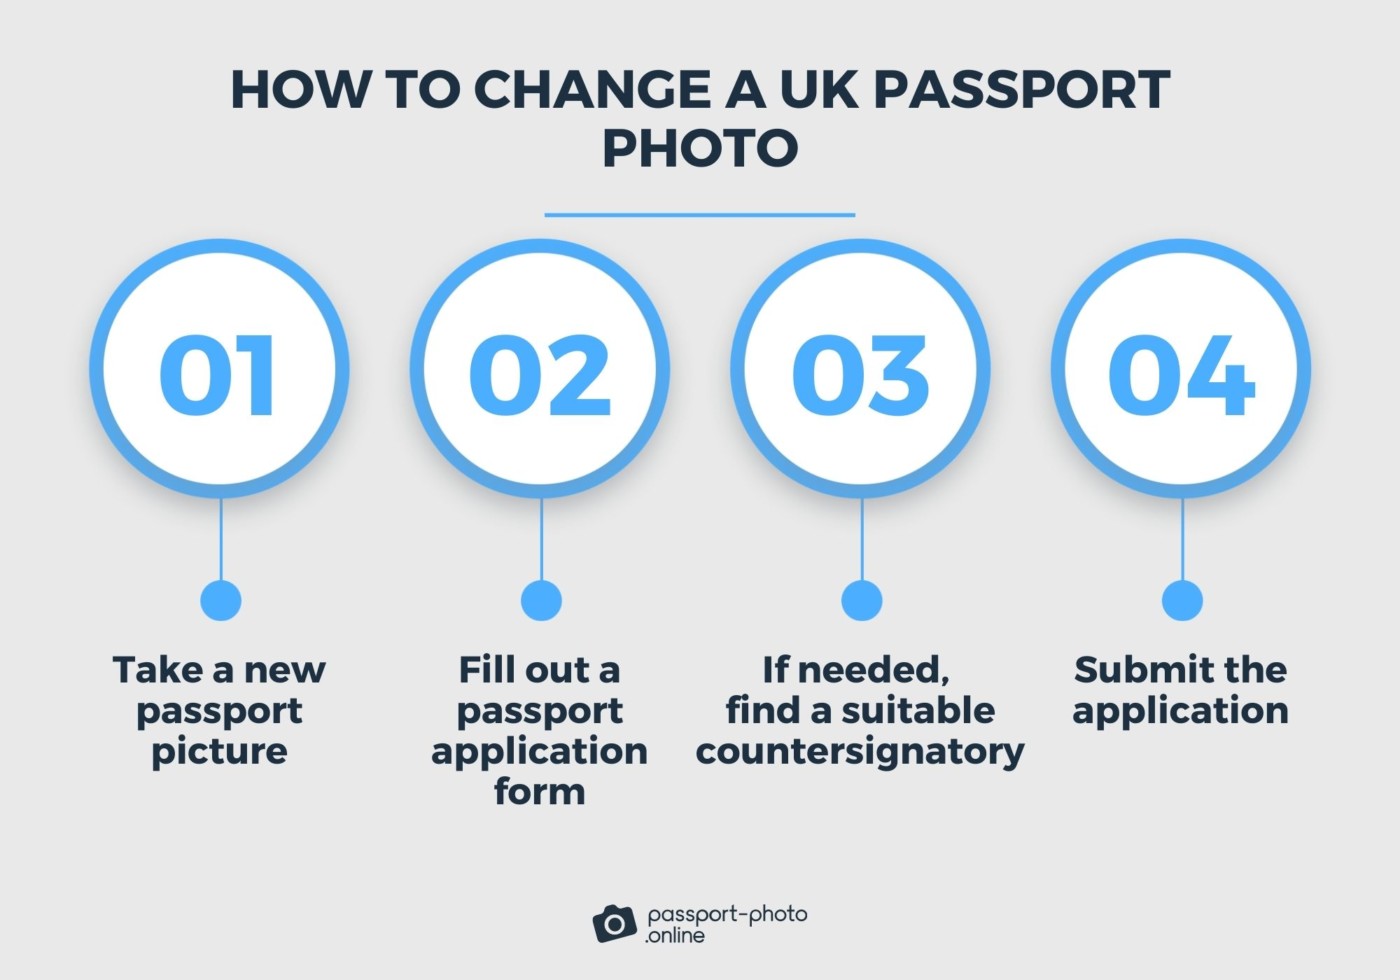 four stages of changing a passport photo.